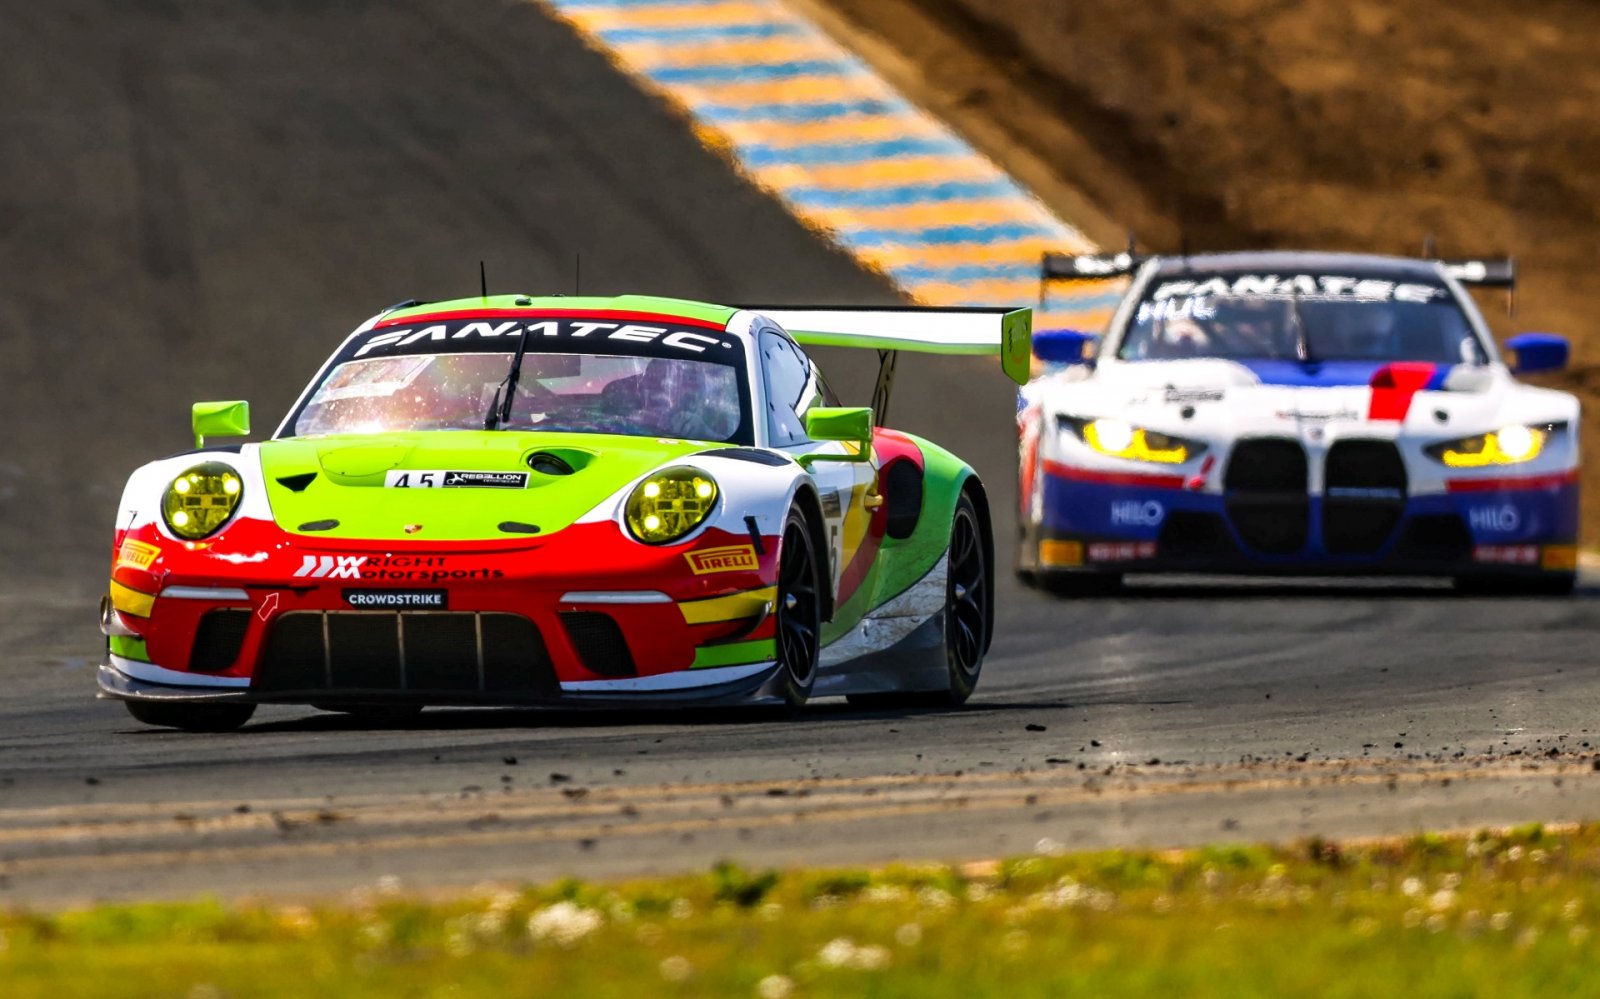 Pepper and Caldarelli Win in Pro, Luck and Heylen Grab Pro/Am in Race 1 at Sonoma